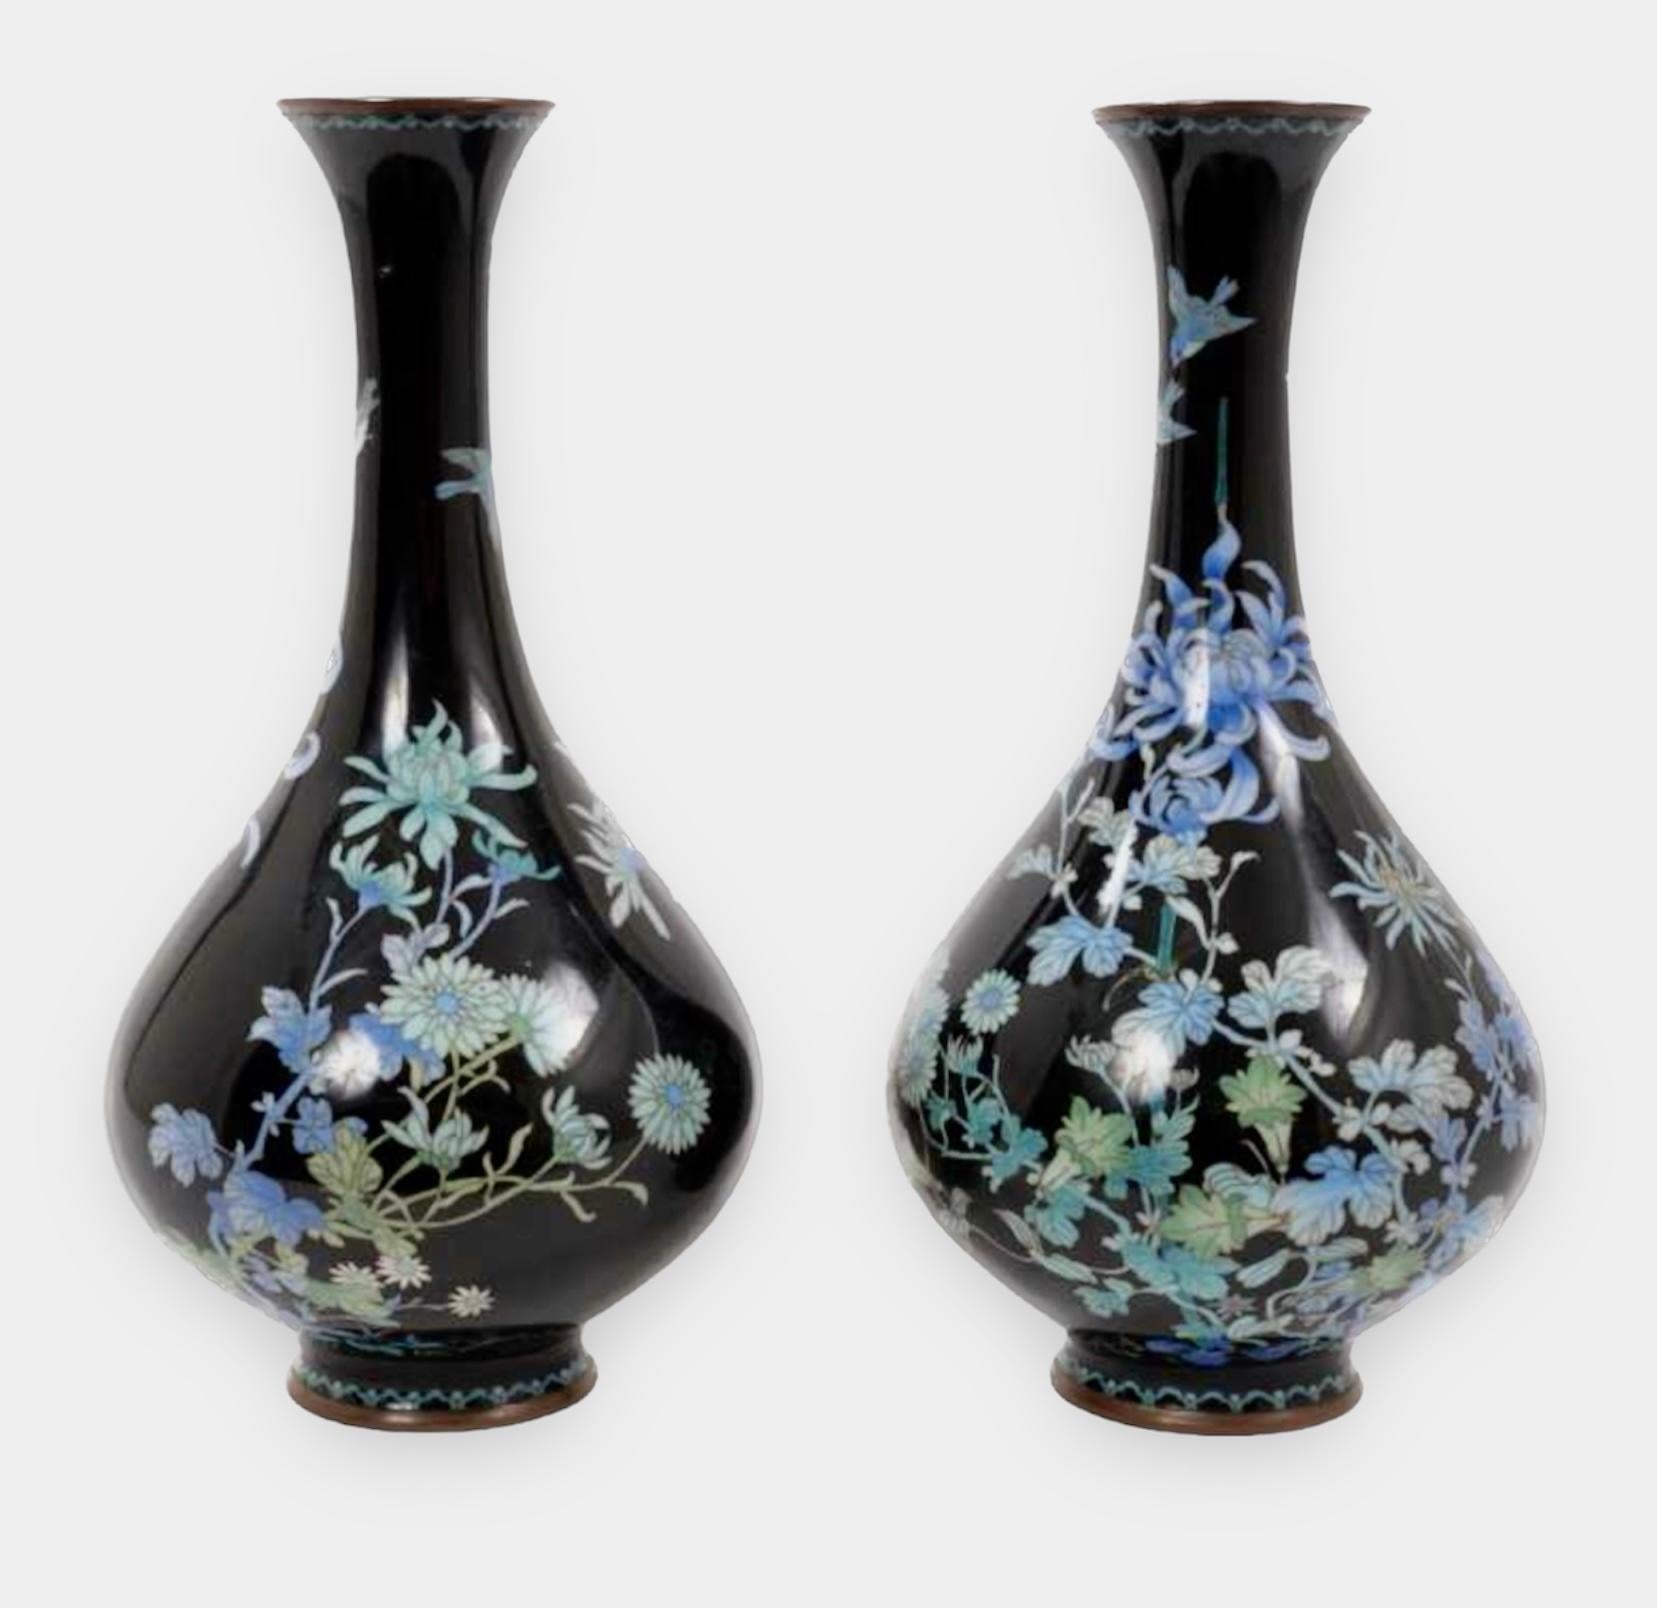 A Magnificent Pair of Japanese Cloisonne Enamel Oviform Vases 19th Century 
Meiji period 

A Pair of Japanese cloisonné enamel oviform vases worked with silver wire and decorated with a fine pale blue chrysanthemums and foliage on a midnight black